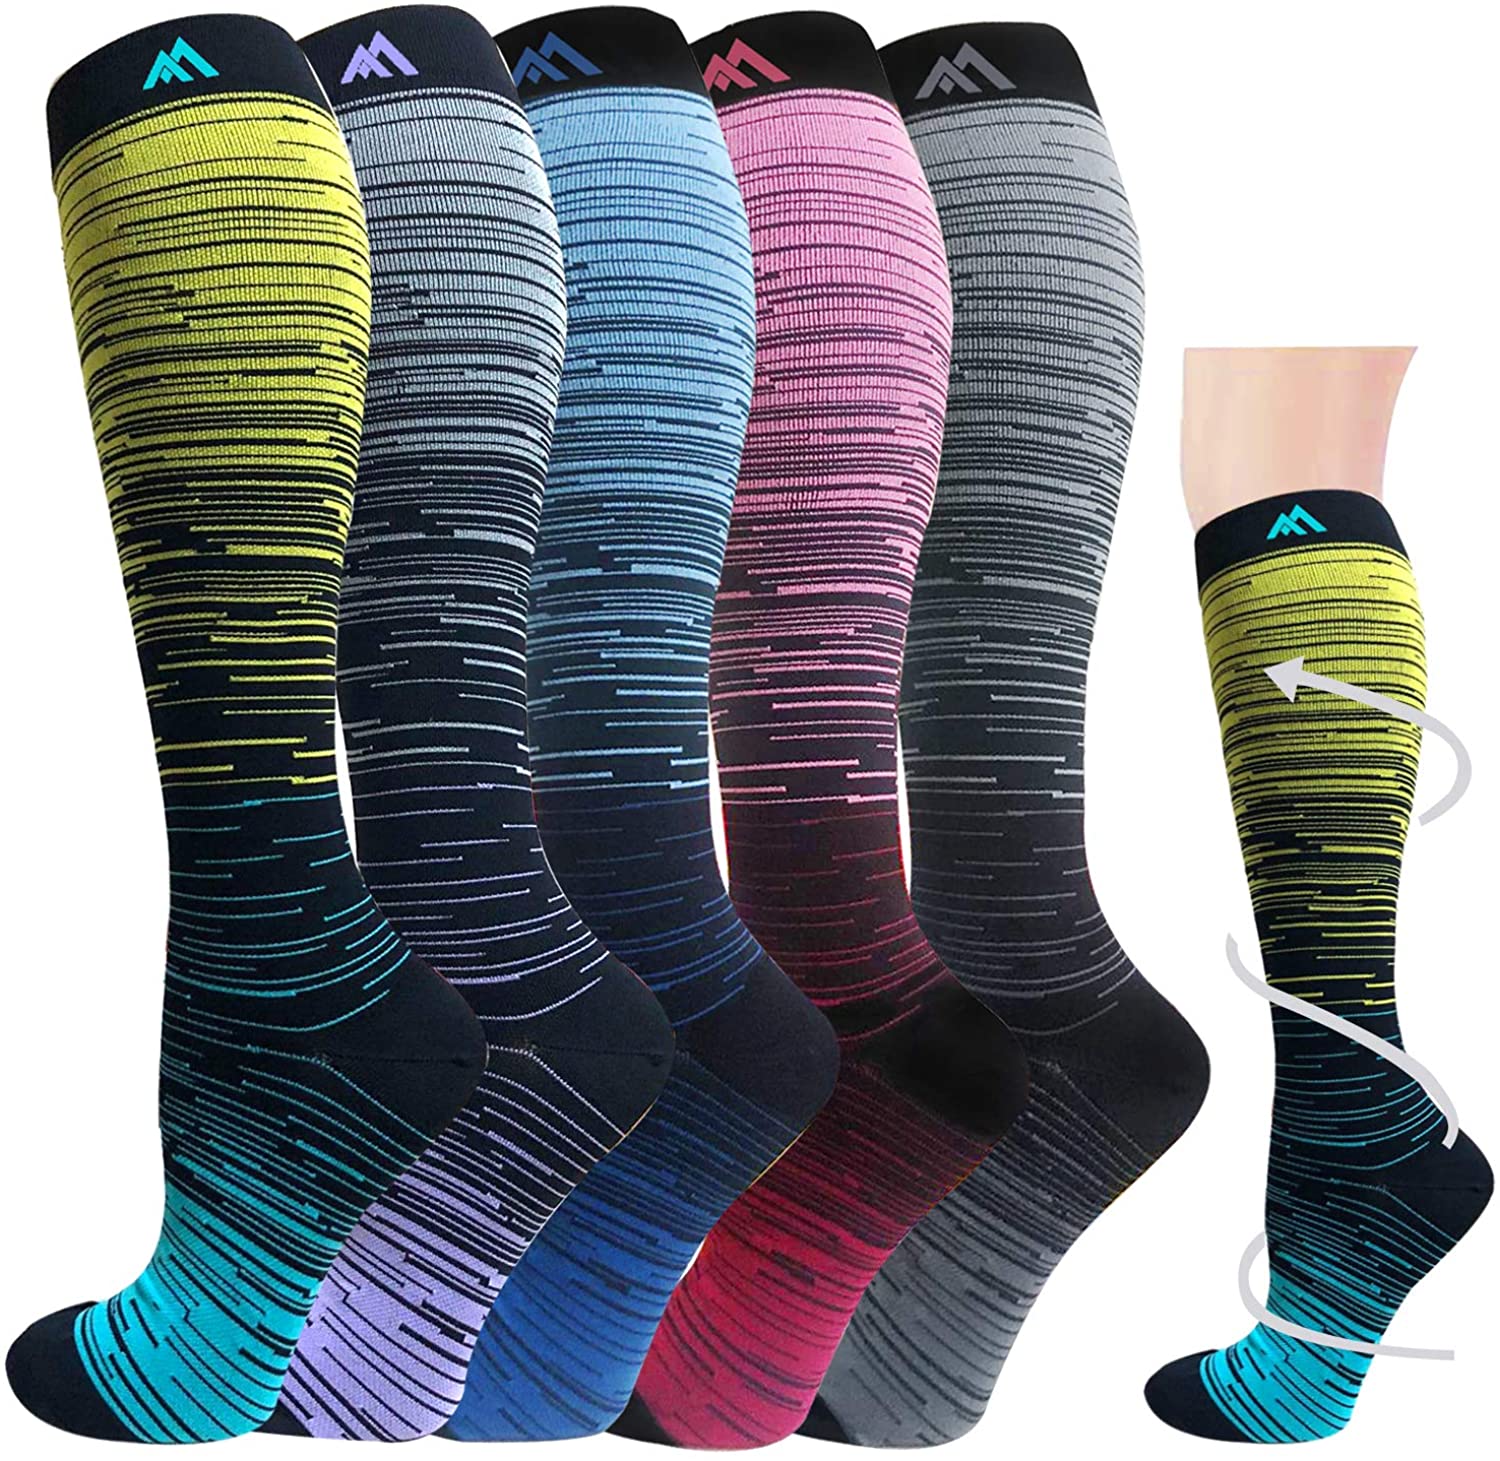 Laite Hebe 4 Pairs-Compression Socks for Women&Men Circulation-Best Support  for